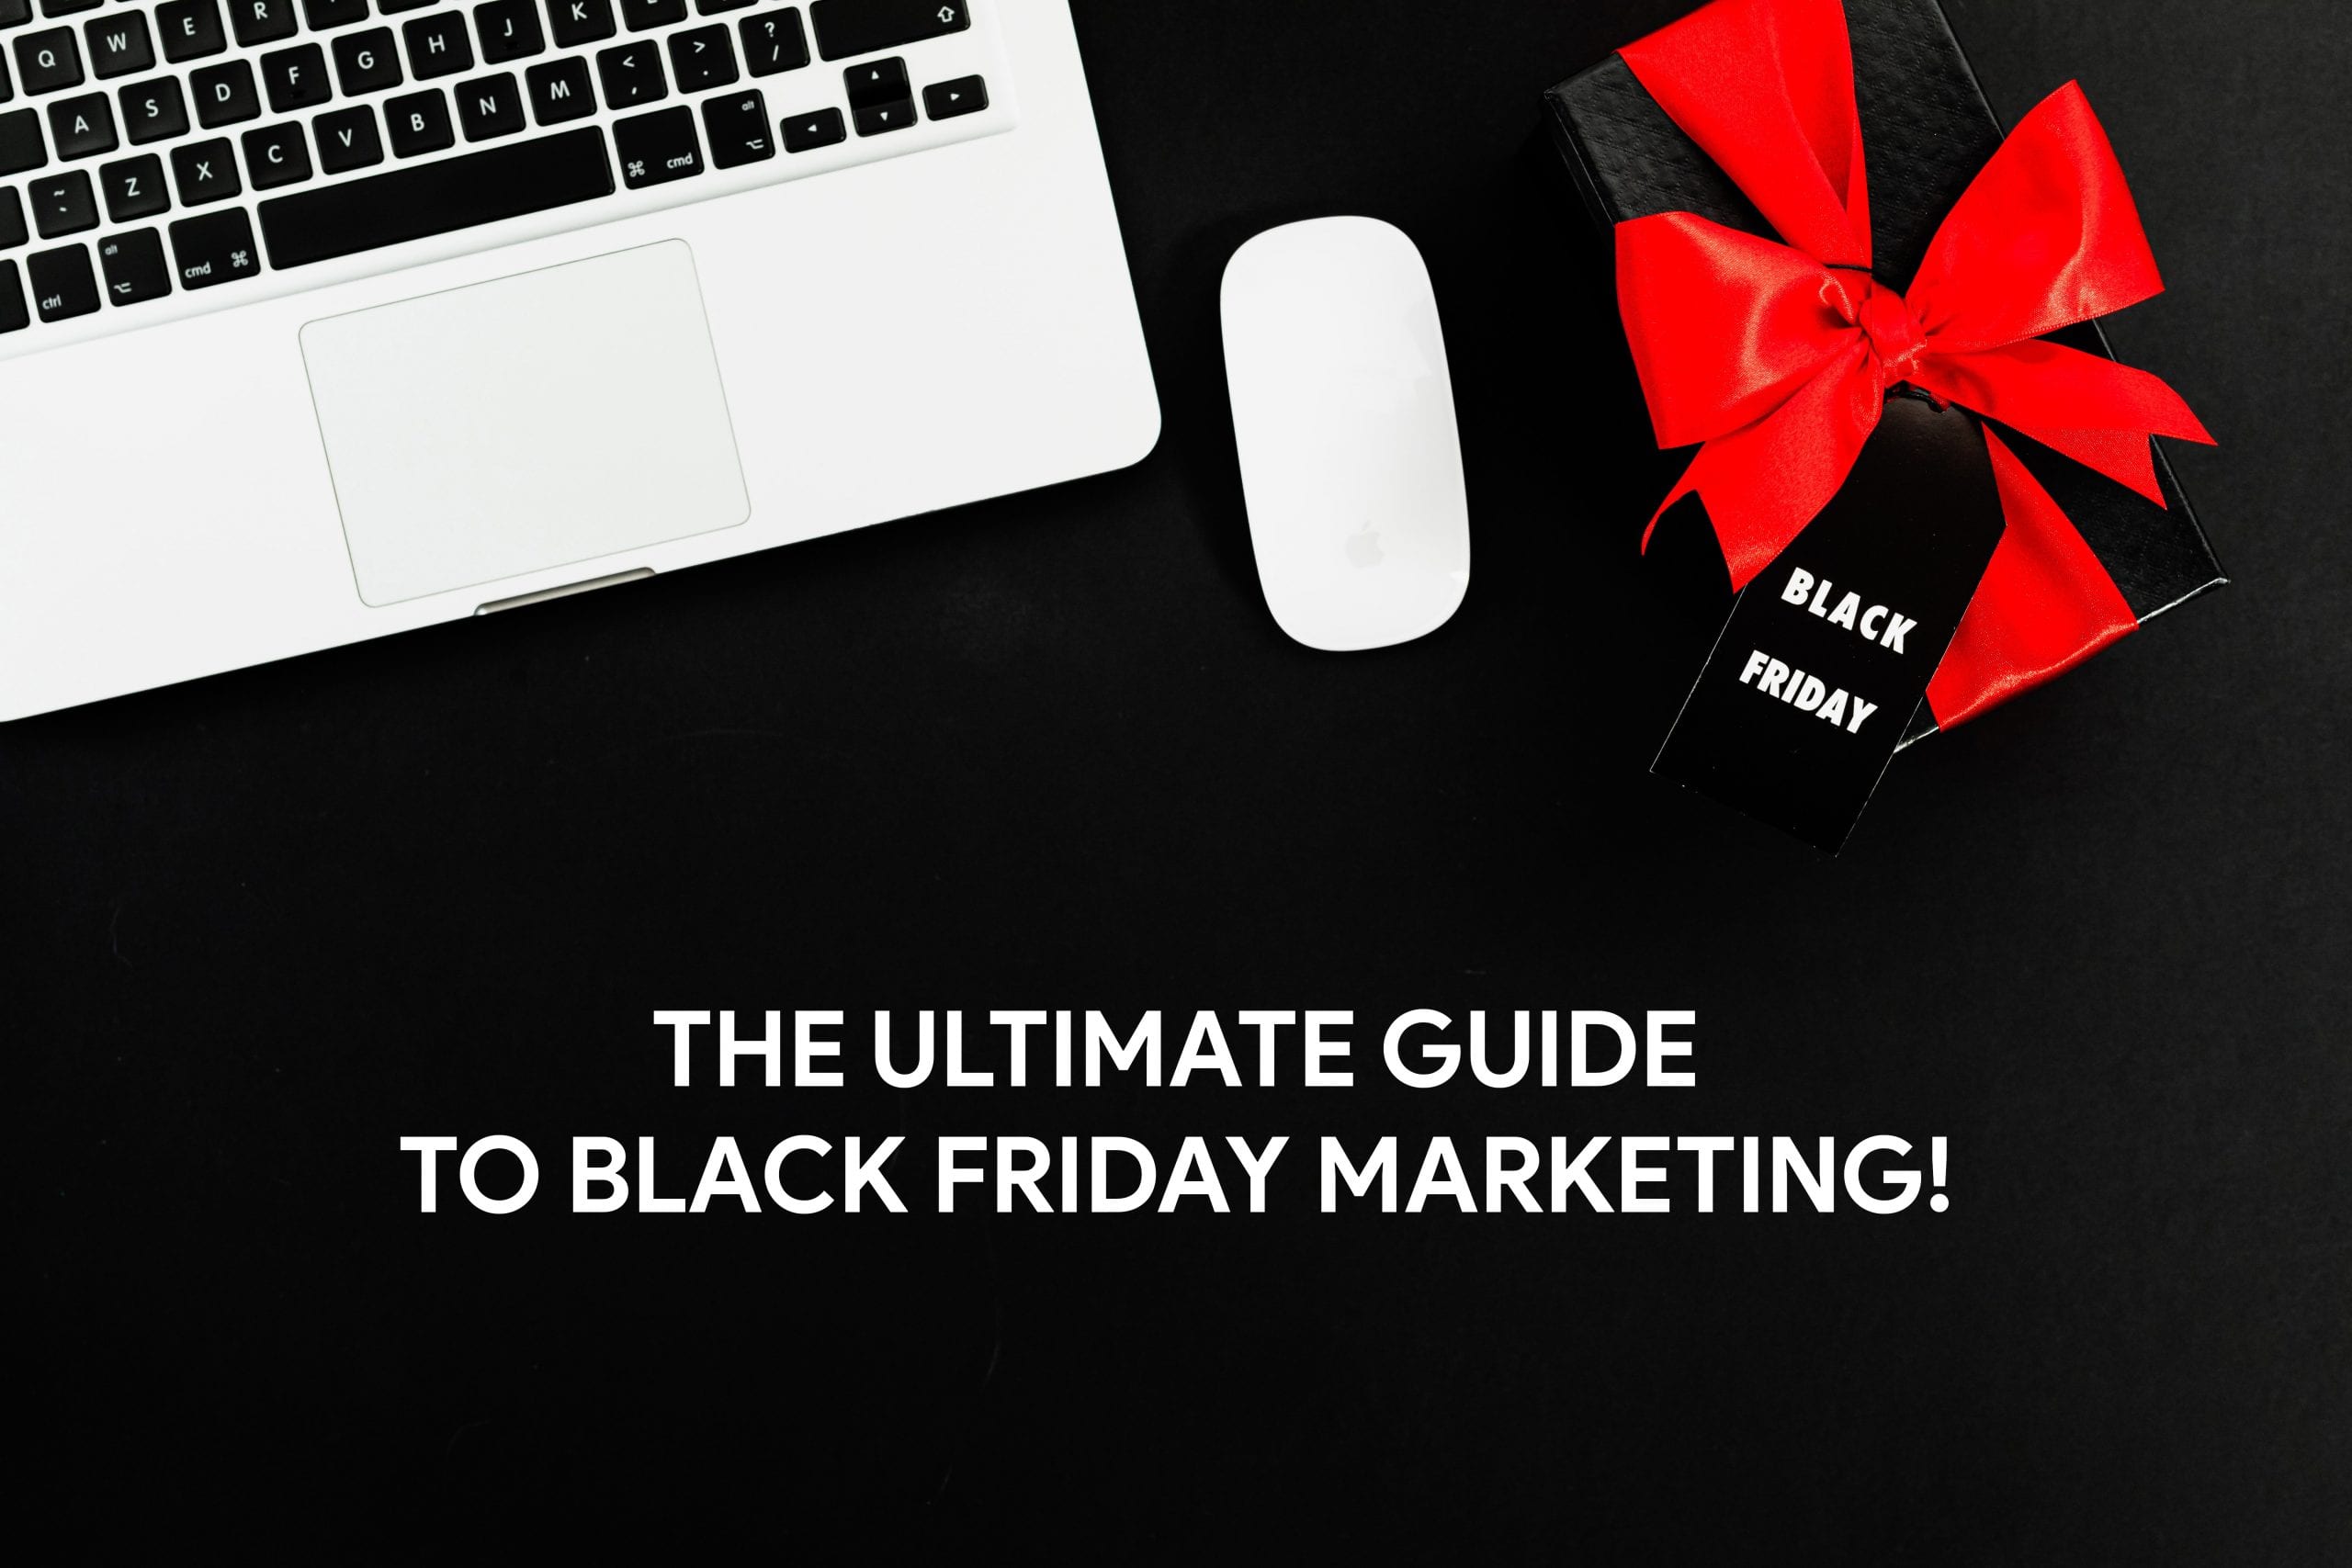 The Ultimate Guide to Black Friday Marketing